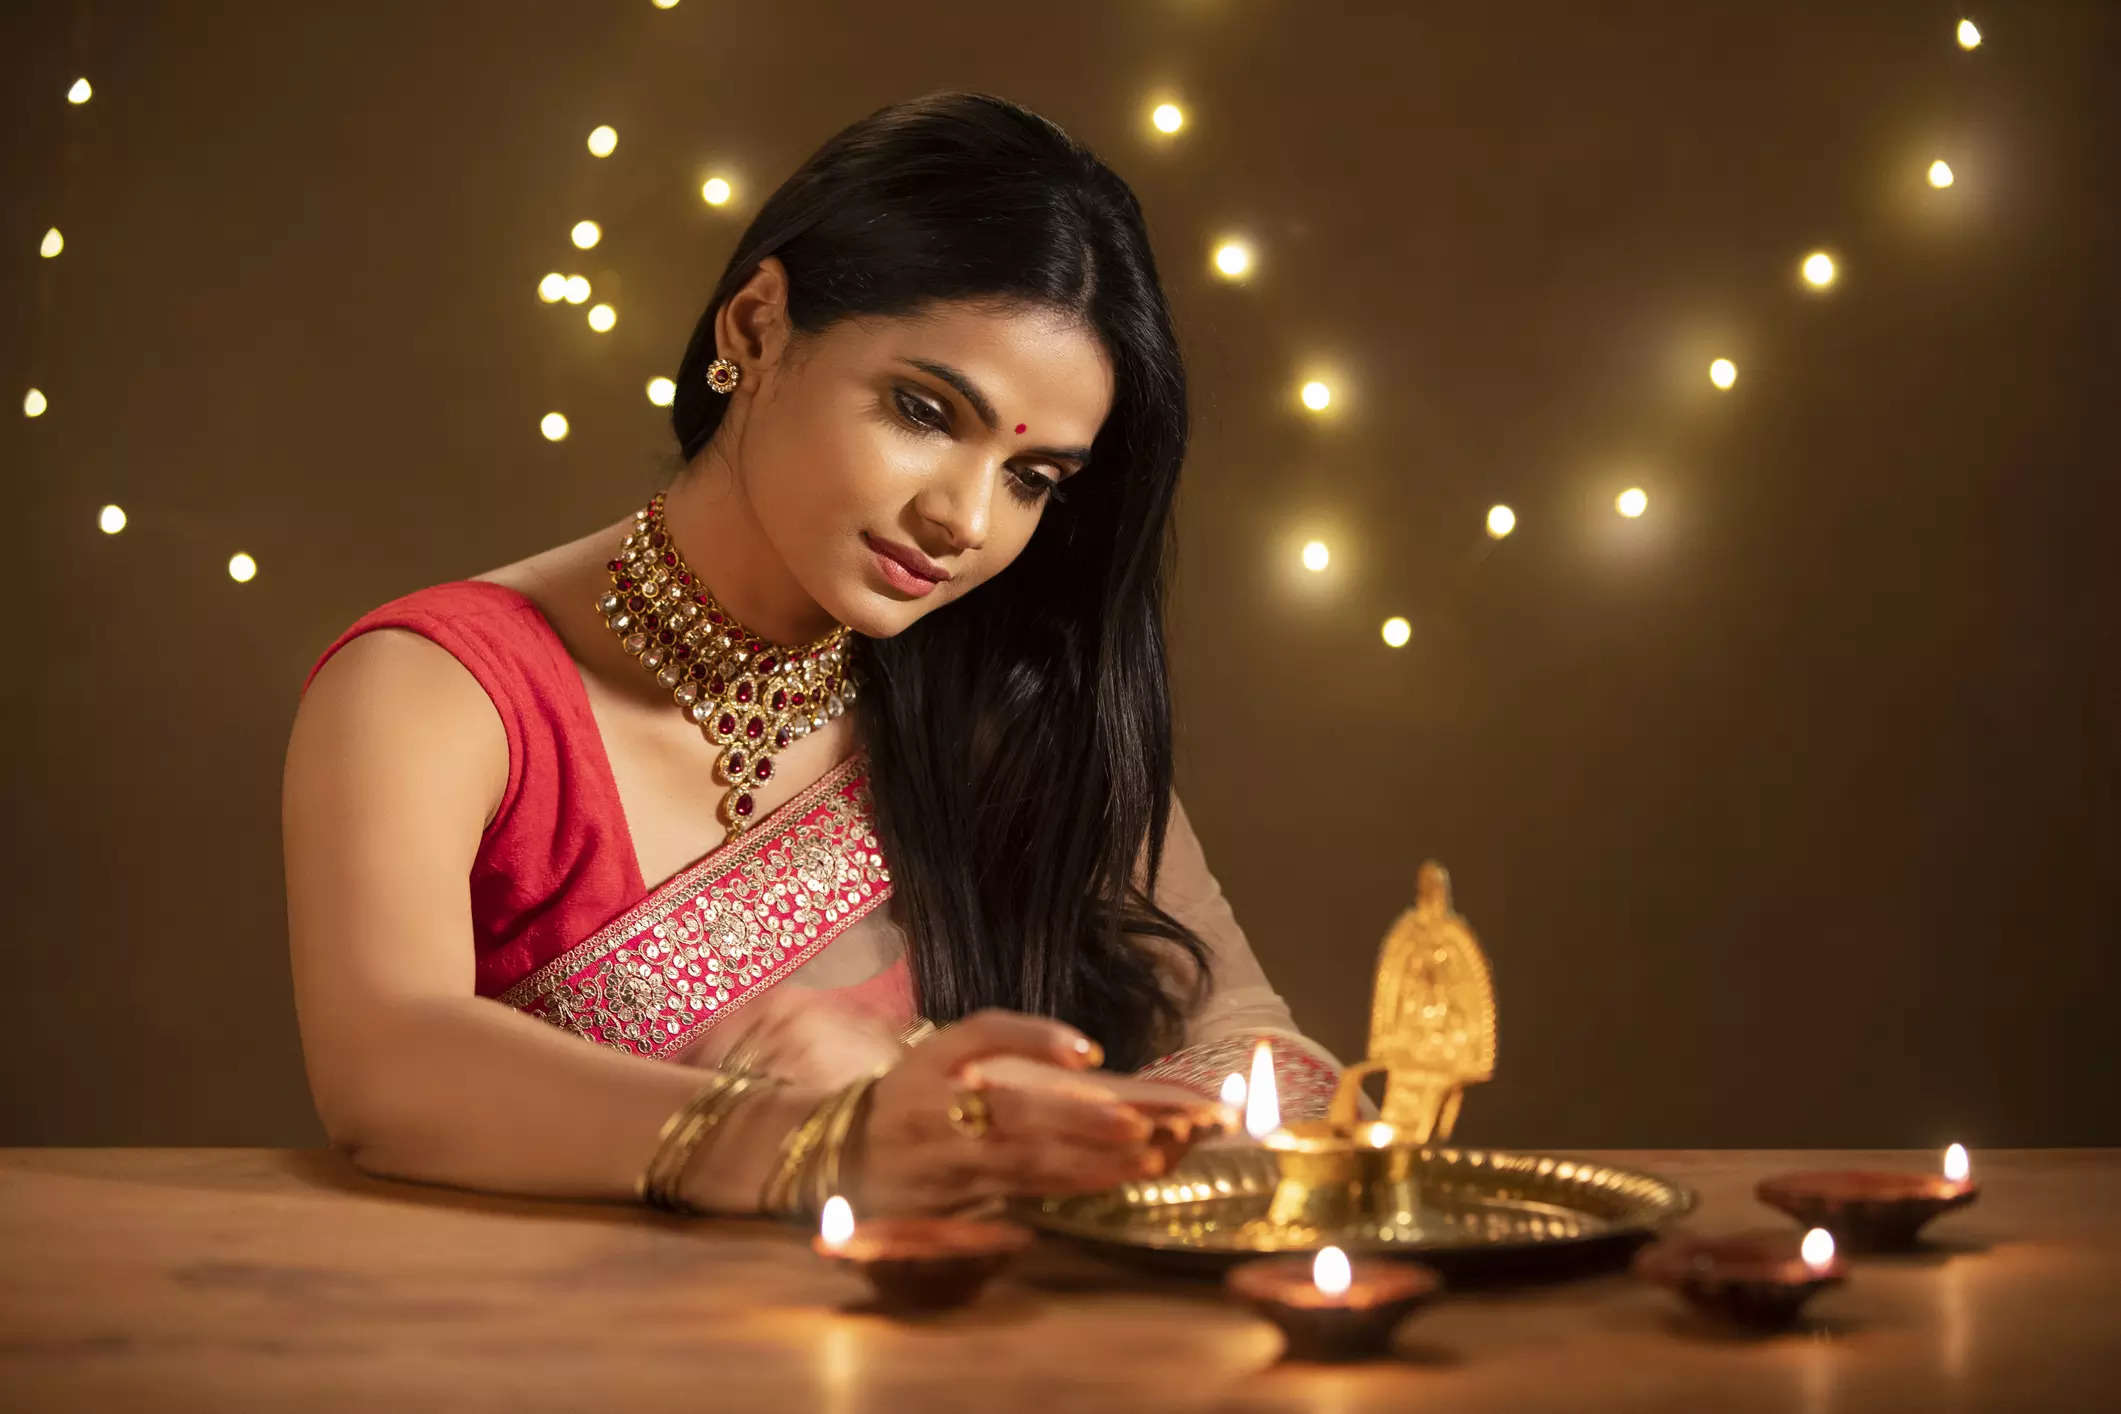 Diwali 2022 Clean the air around you with mustard oil diyas  know the benefits of lighting lamps on the festival of light